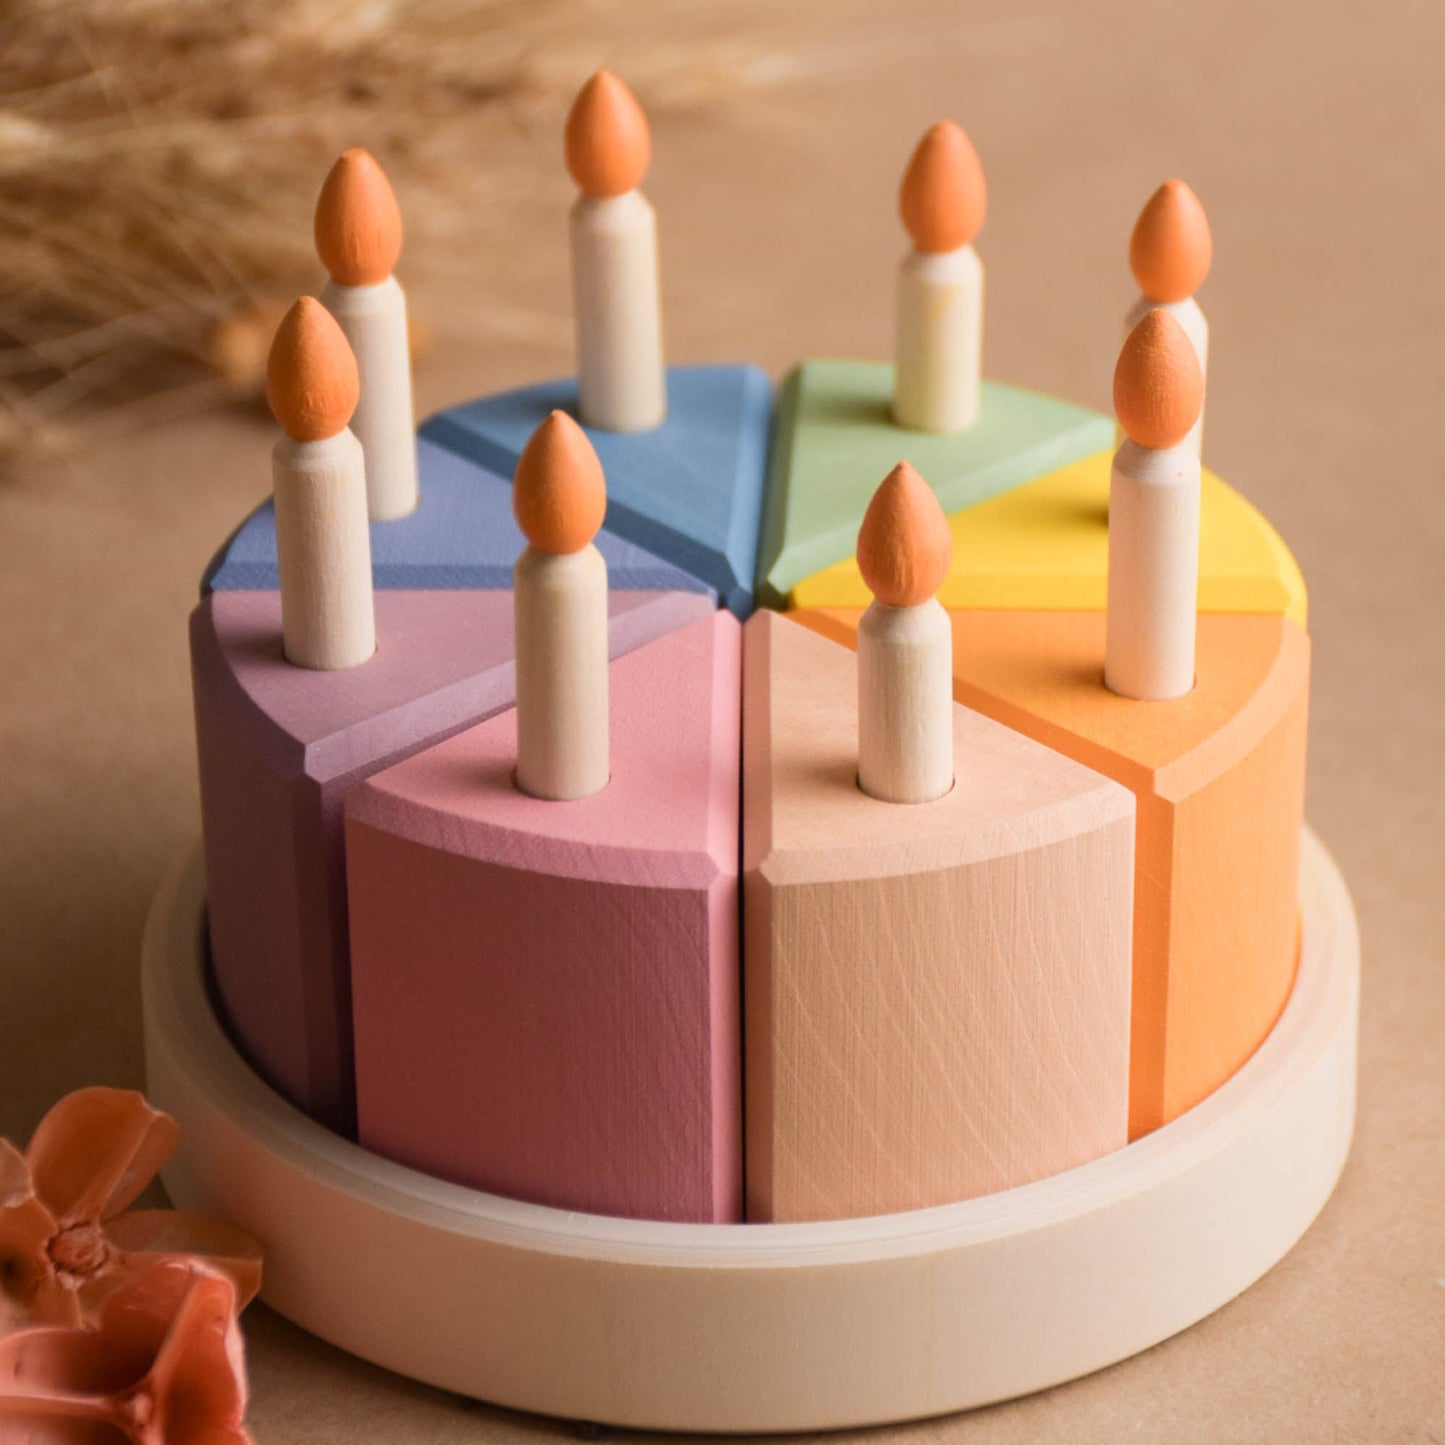 Birthday Cake with Candles For Wooden Play Kitchen